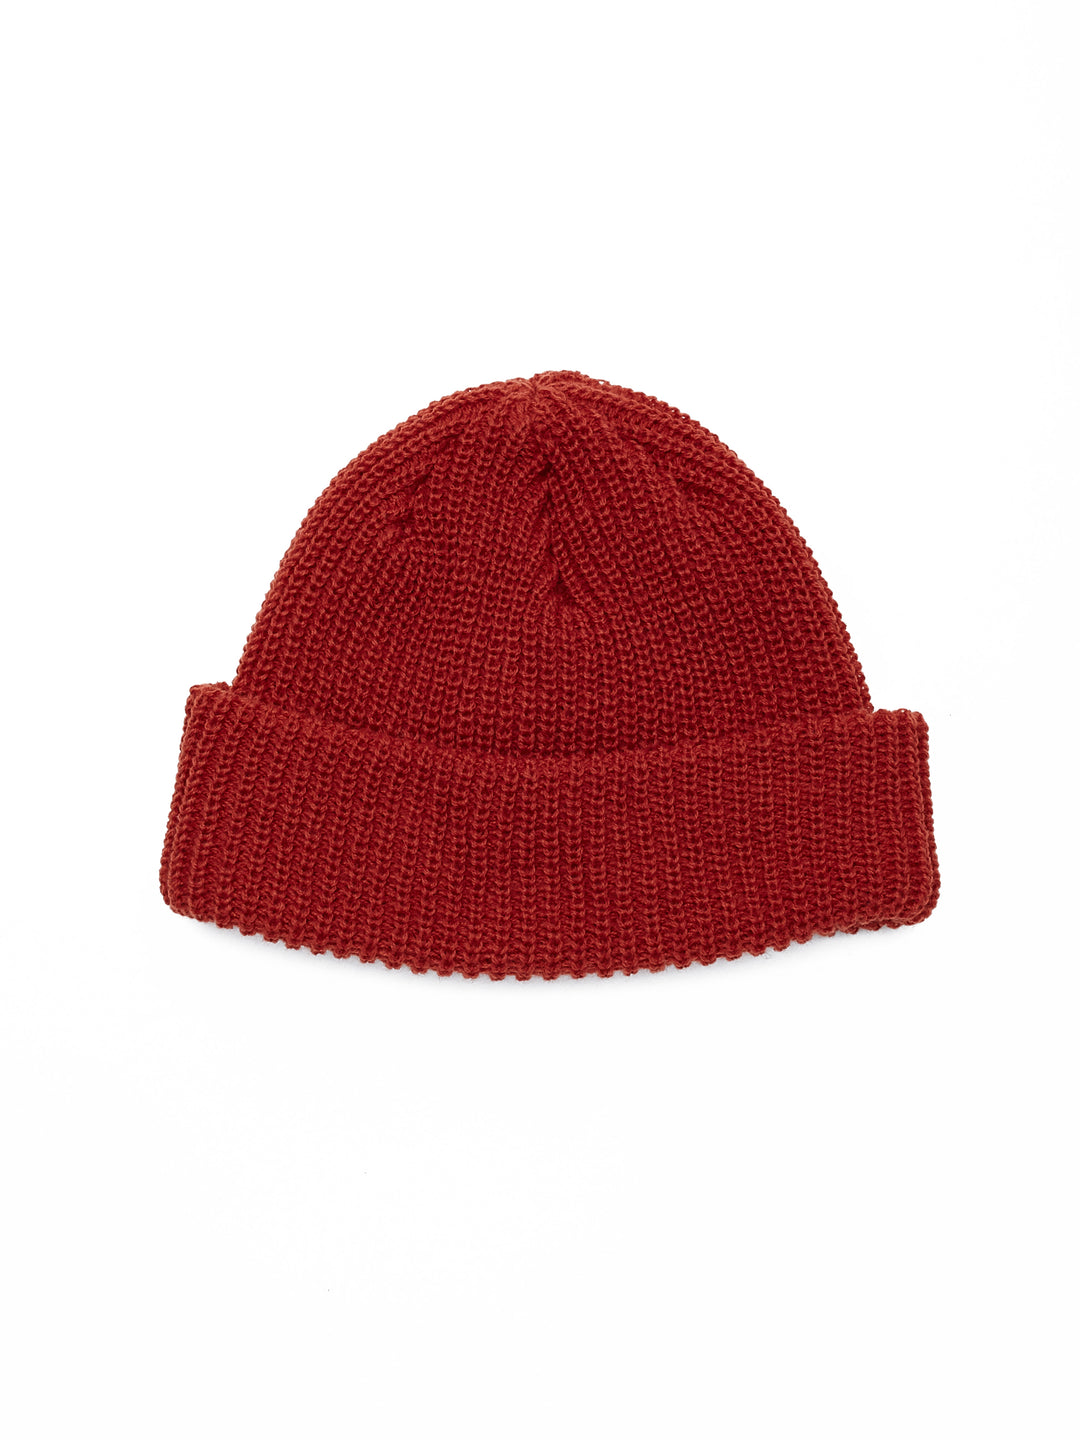 Jumbled Beanie / Brick Red - West of Camden - Main Image Number 2 of 2